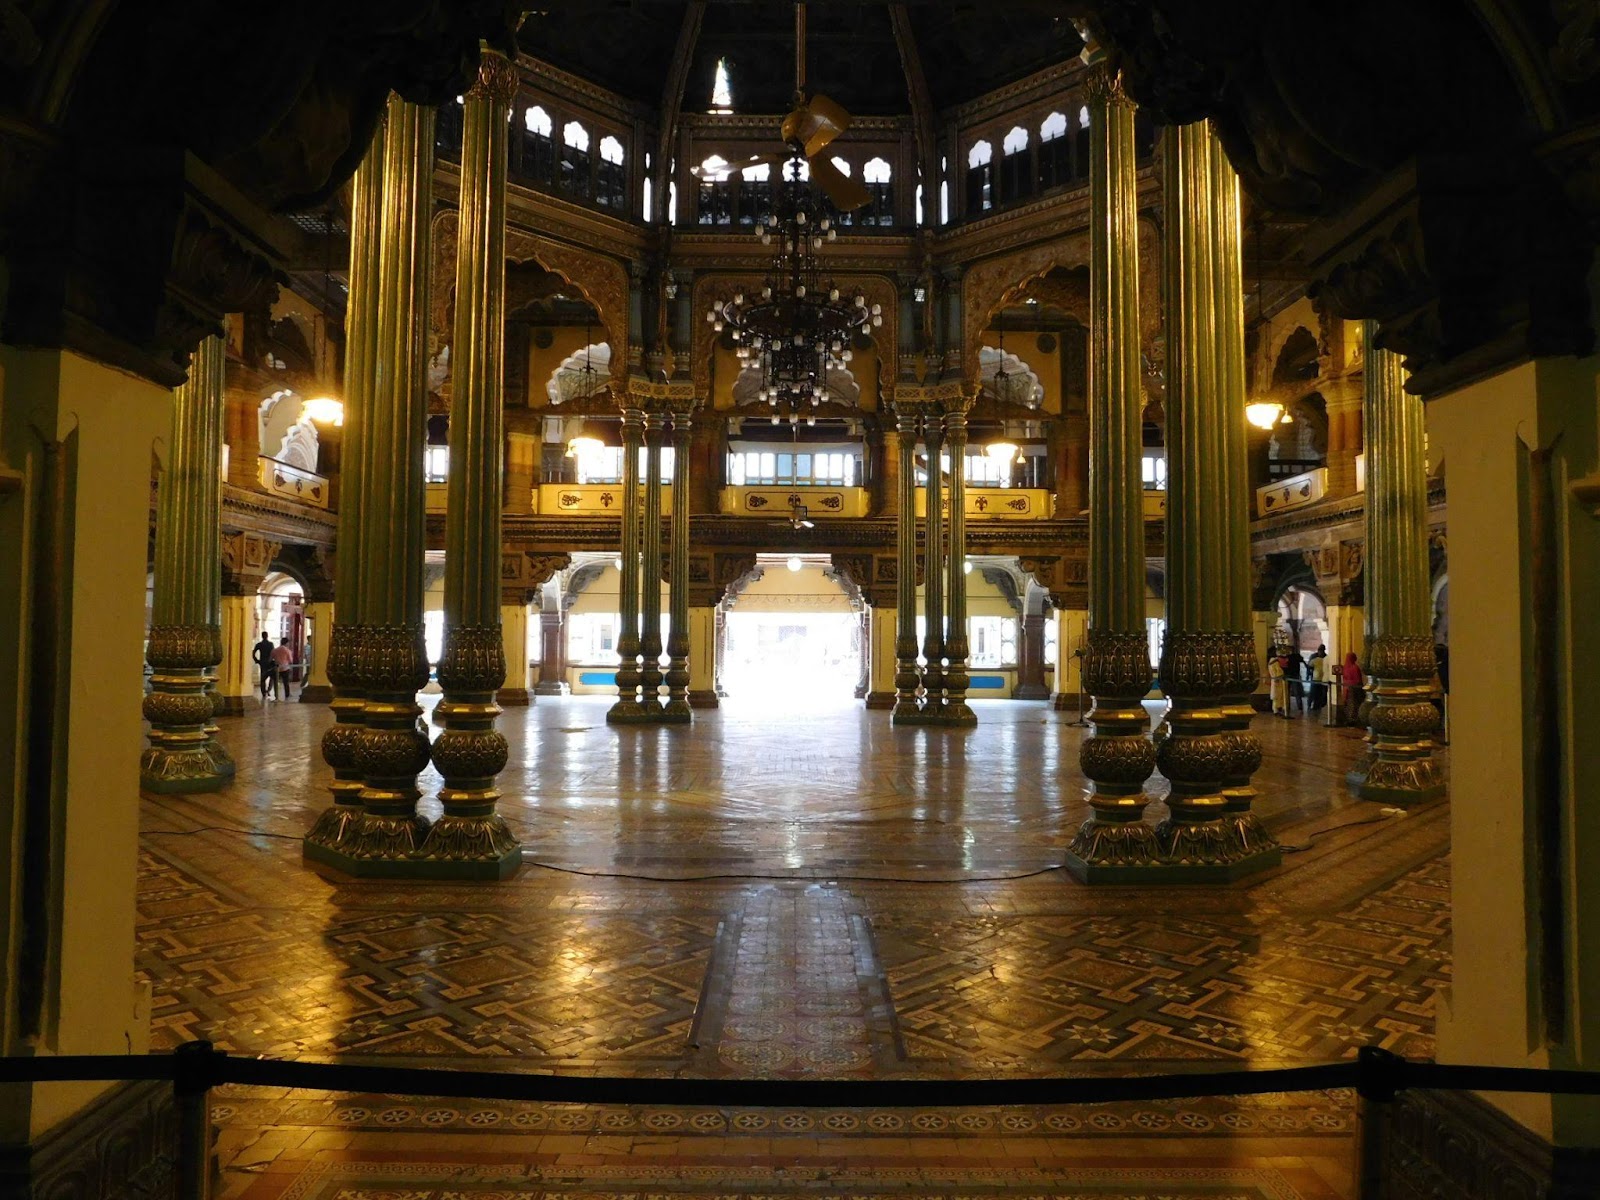 Alt: A picture of arches inside the palace supported by tall pillars.